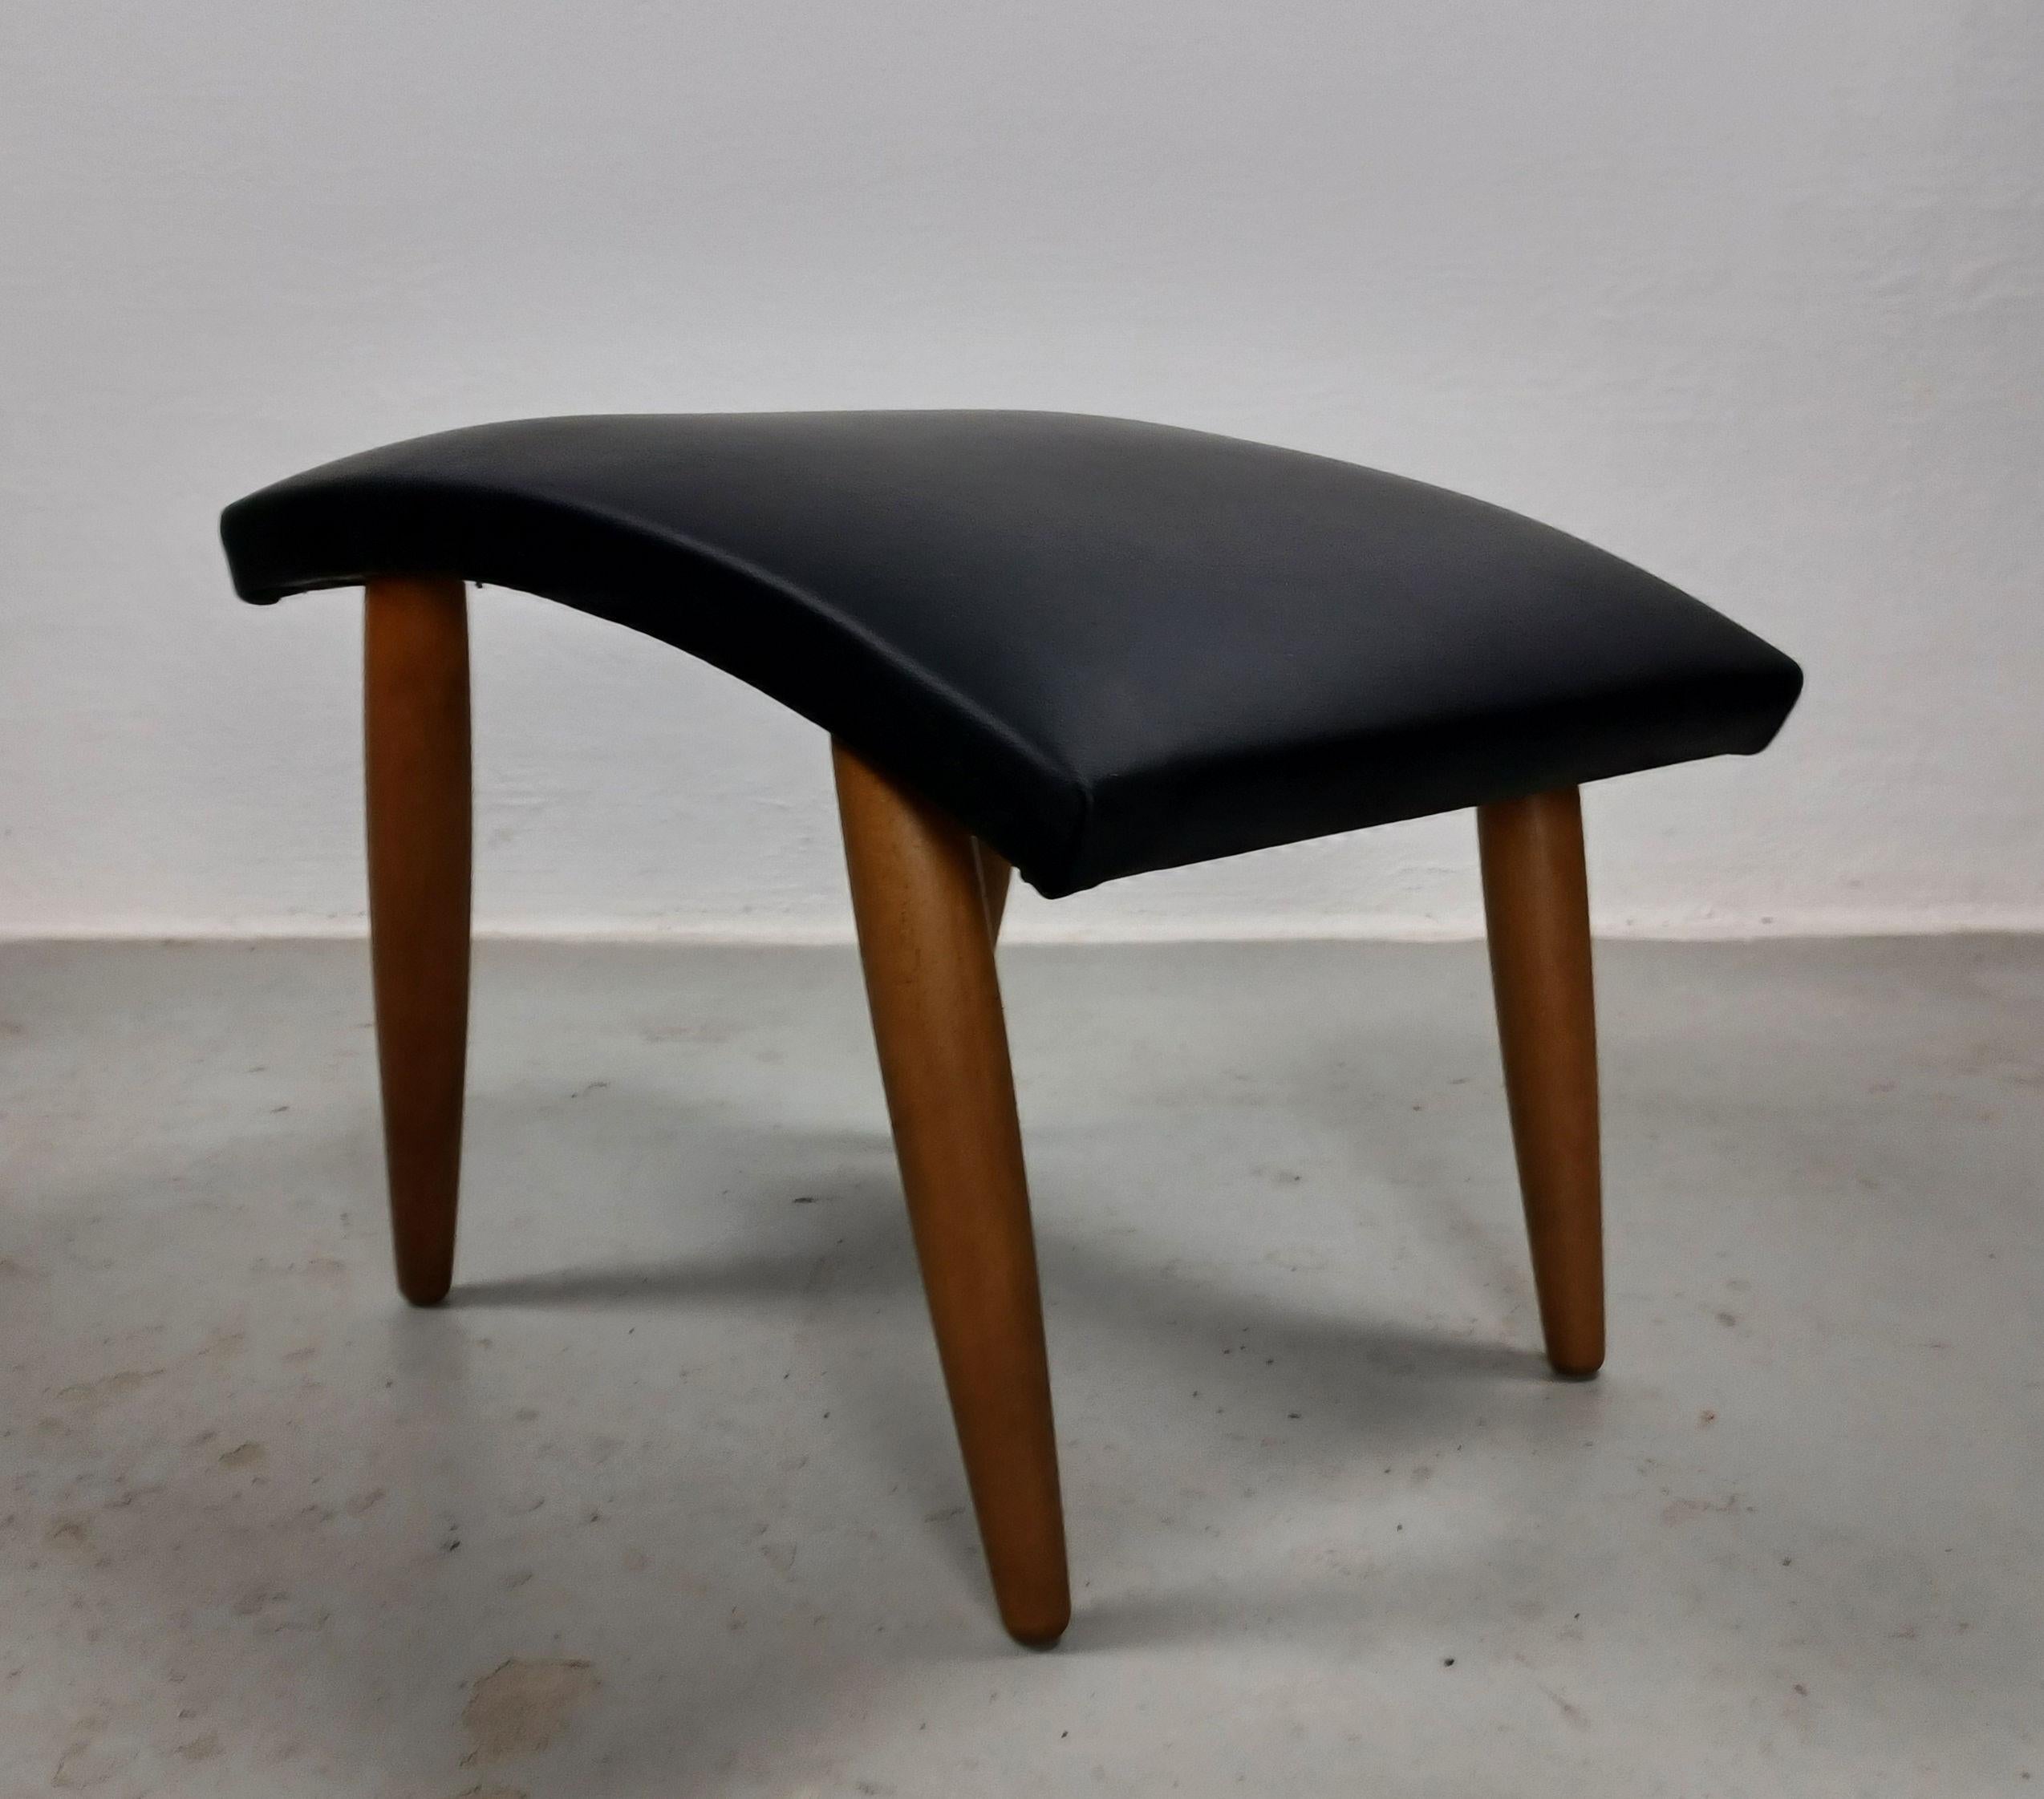 1960's, Restored Danish Footstool Reupholstered in Black Leather 3